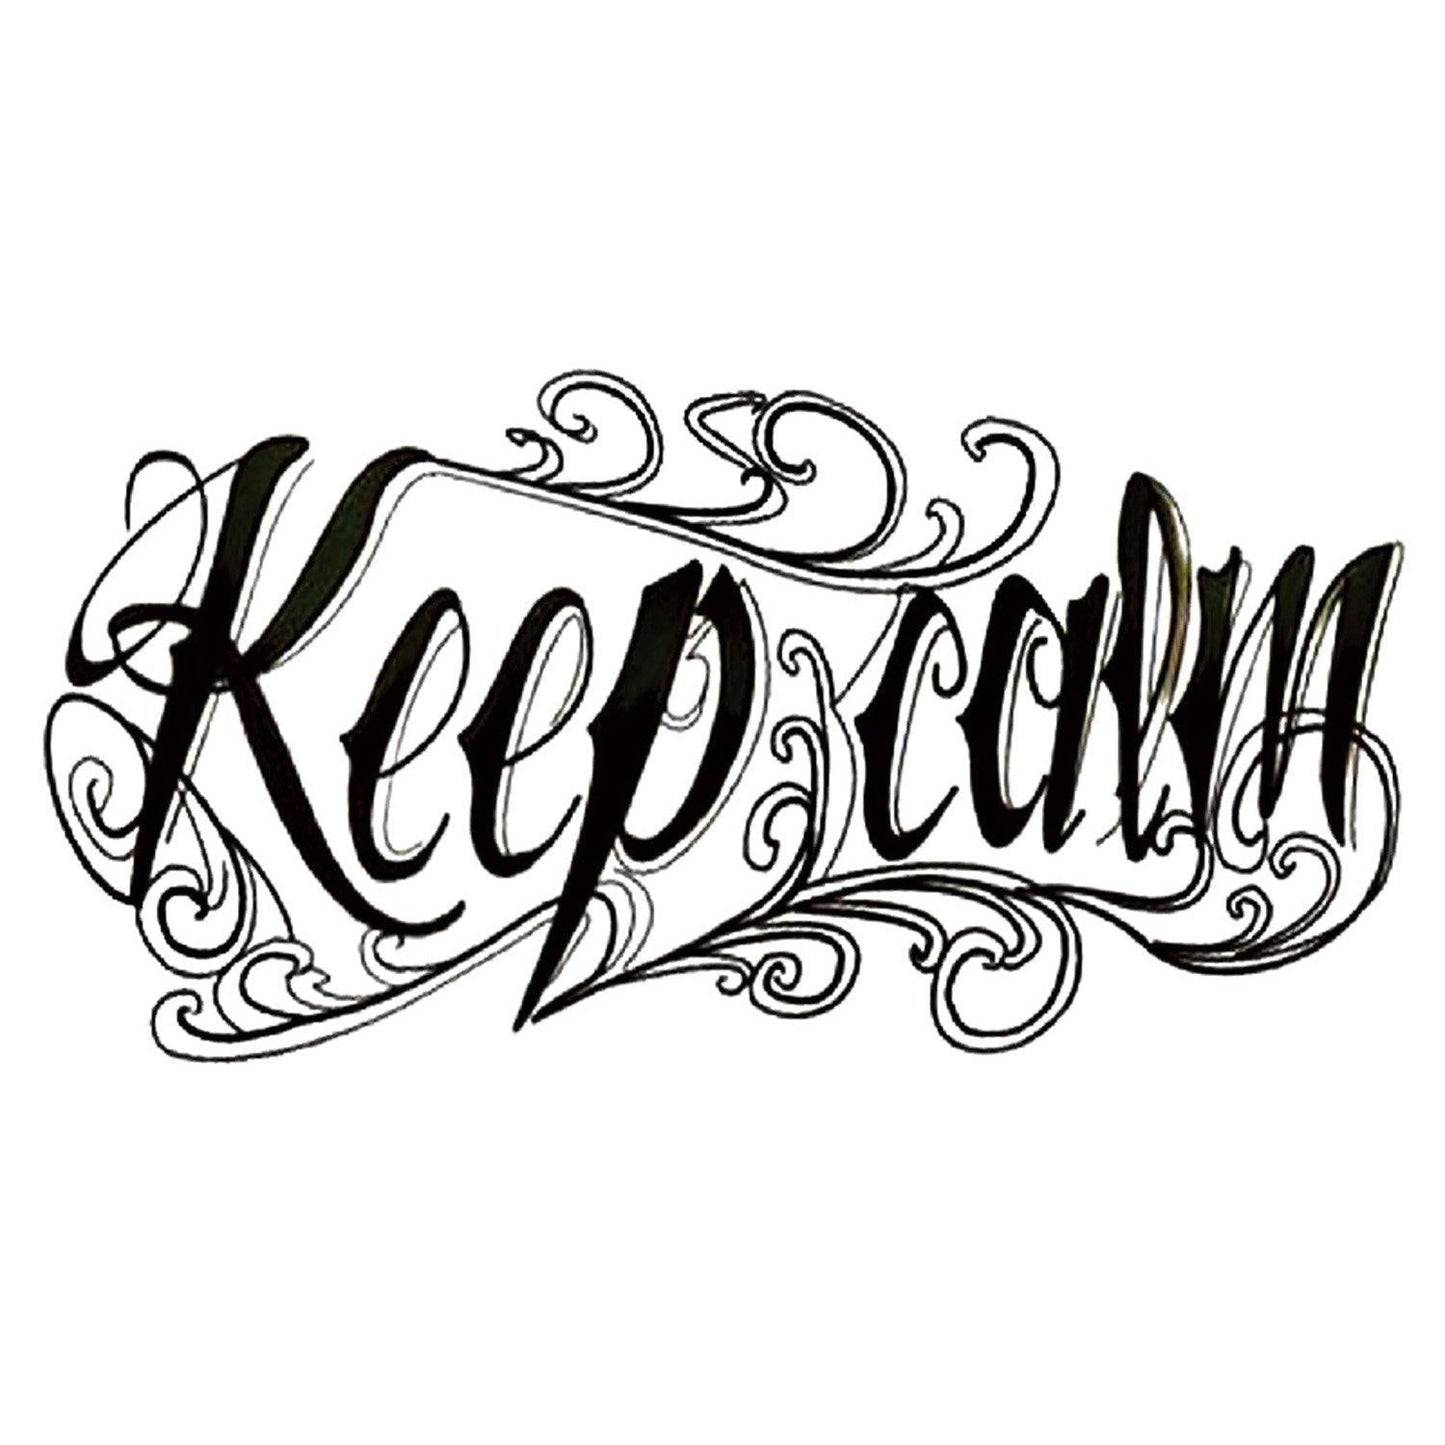 Keep Calm Quote Temporary Tattoo - Body404